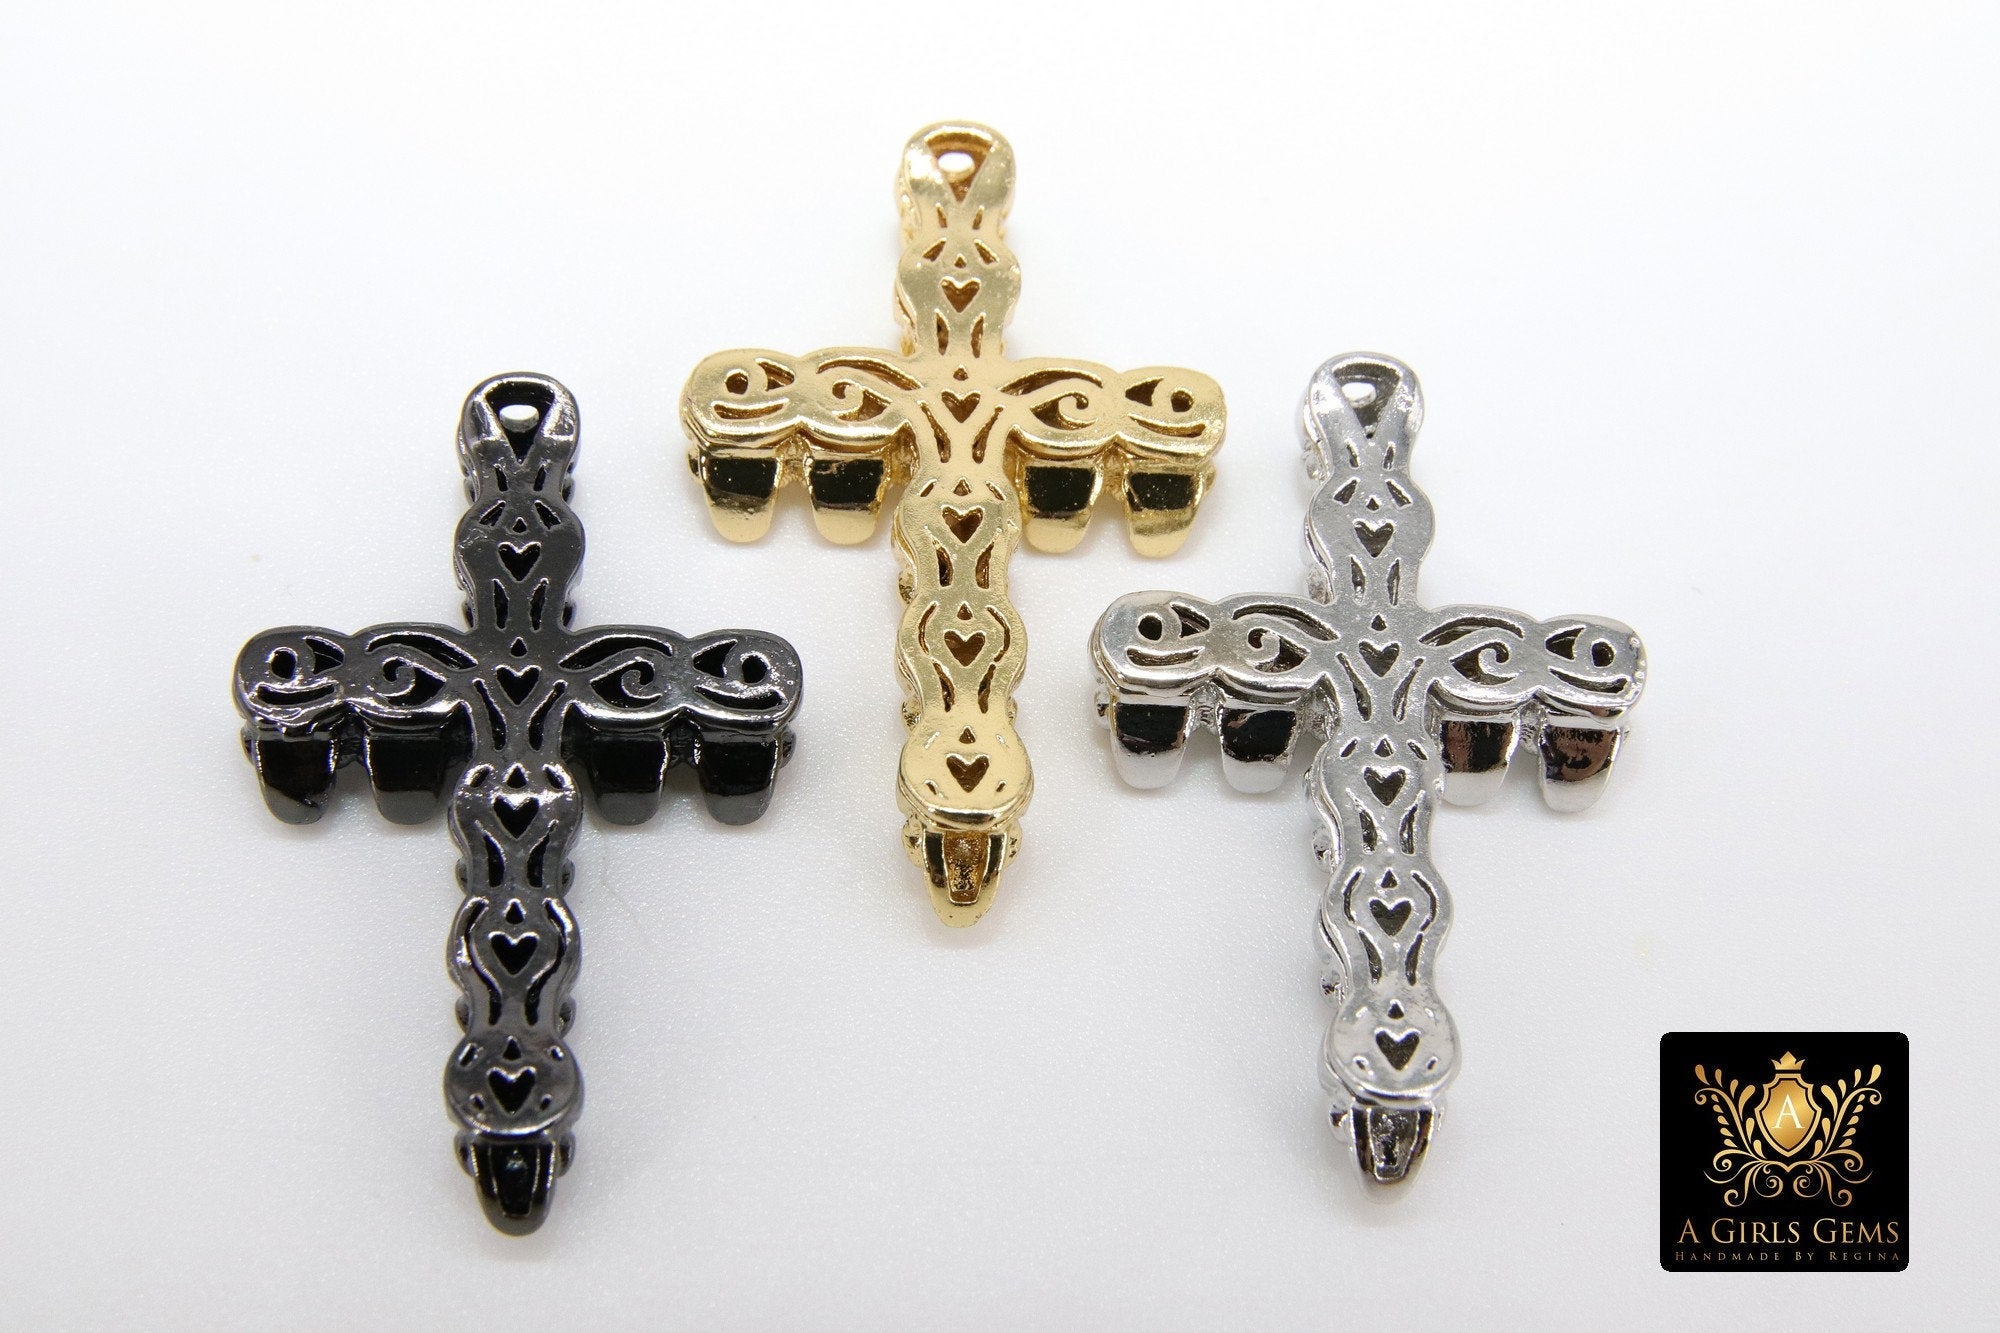 CZ Pave Skull Head Cross Charms, Gold, Black, Silver Necklace Skeleton Beads, Men's Jewelry #331 - A Girls Gems